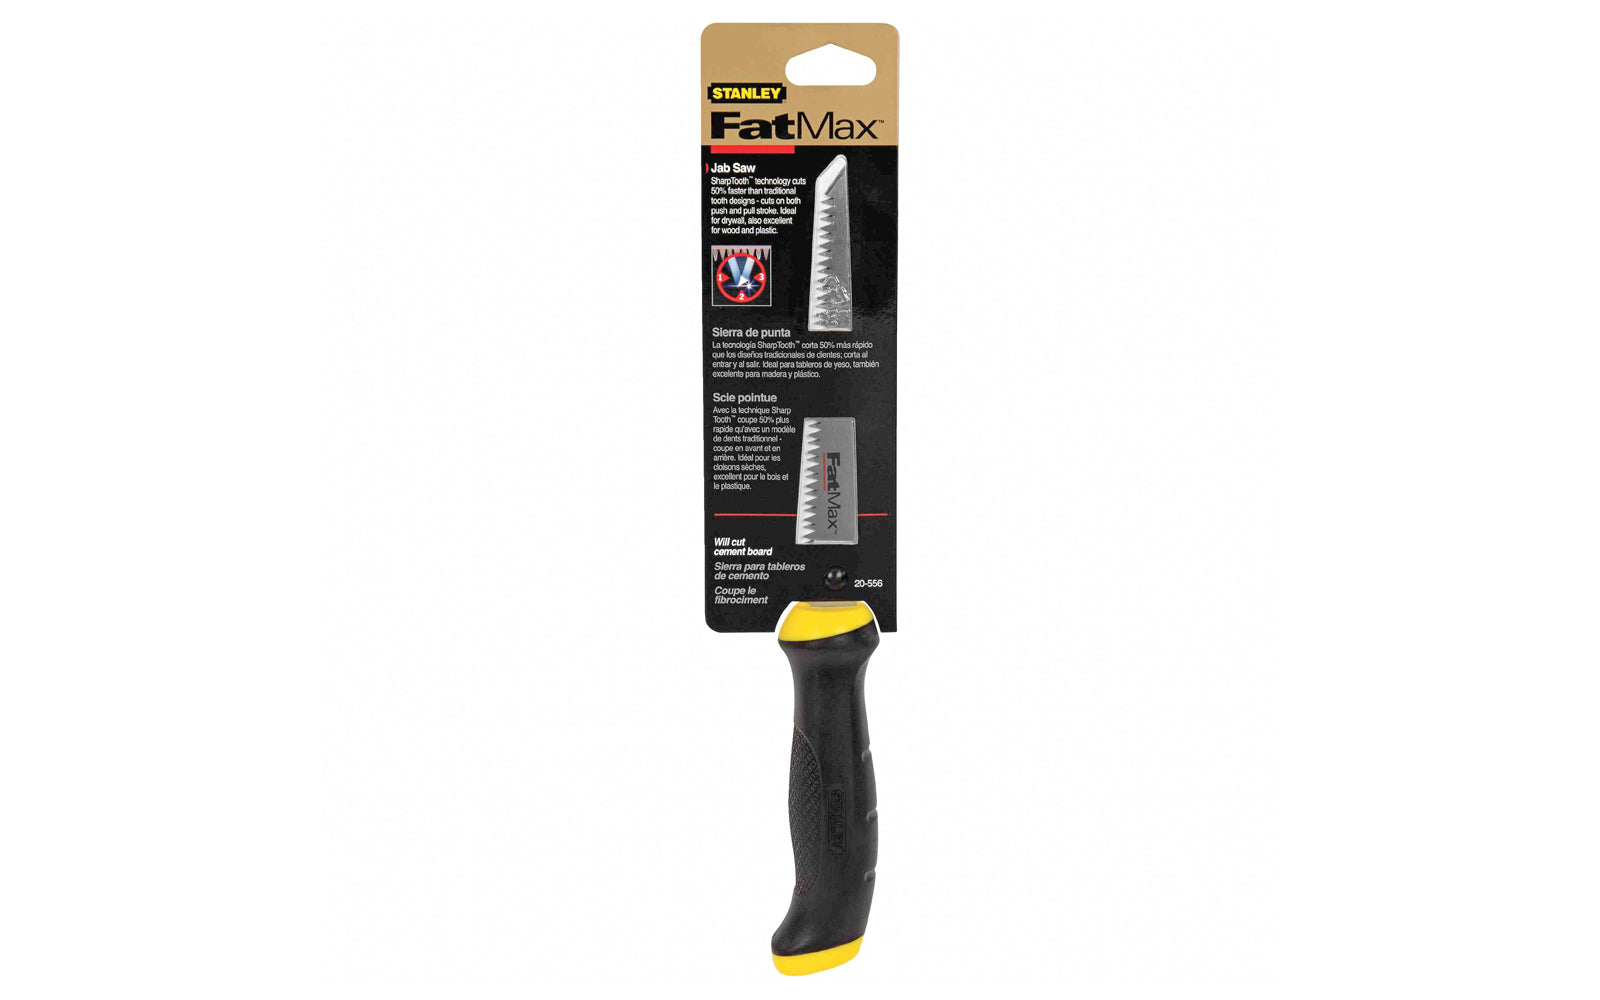 Stanley FatMax 6" Jab Saw / Drywall Saw with Rubber Handle ~ 20-556 - Made in France ~ Designed for drywall, wood, & plastic work